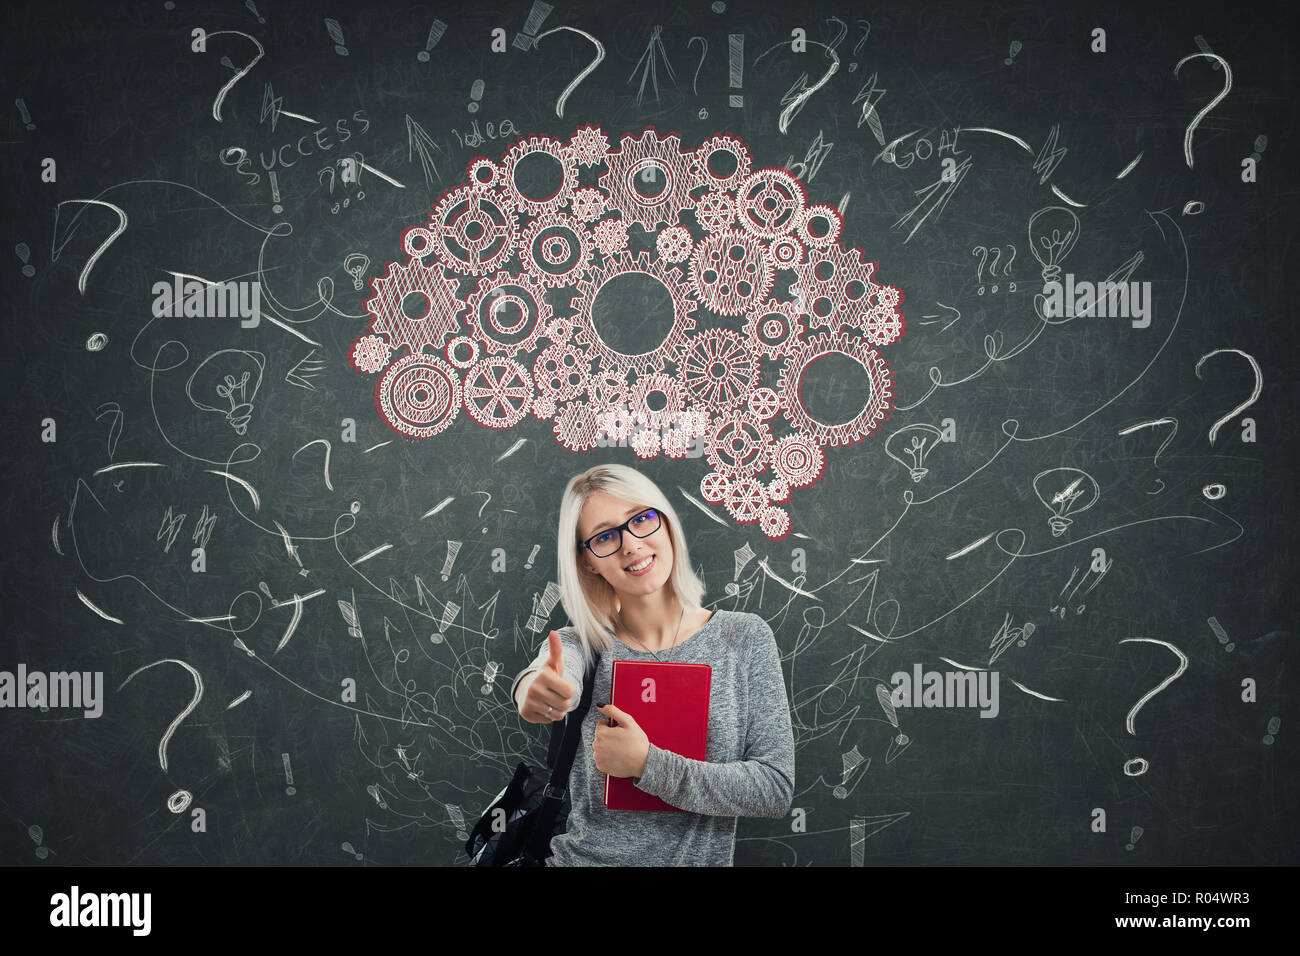 Young woman student wearing glasses holding a book thumb up in front of a blackboard. Gear wheels brain above head, positive thinking mess as thoughts Stock Photo